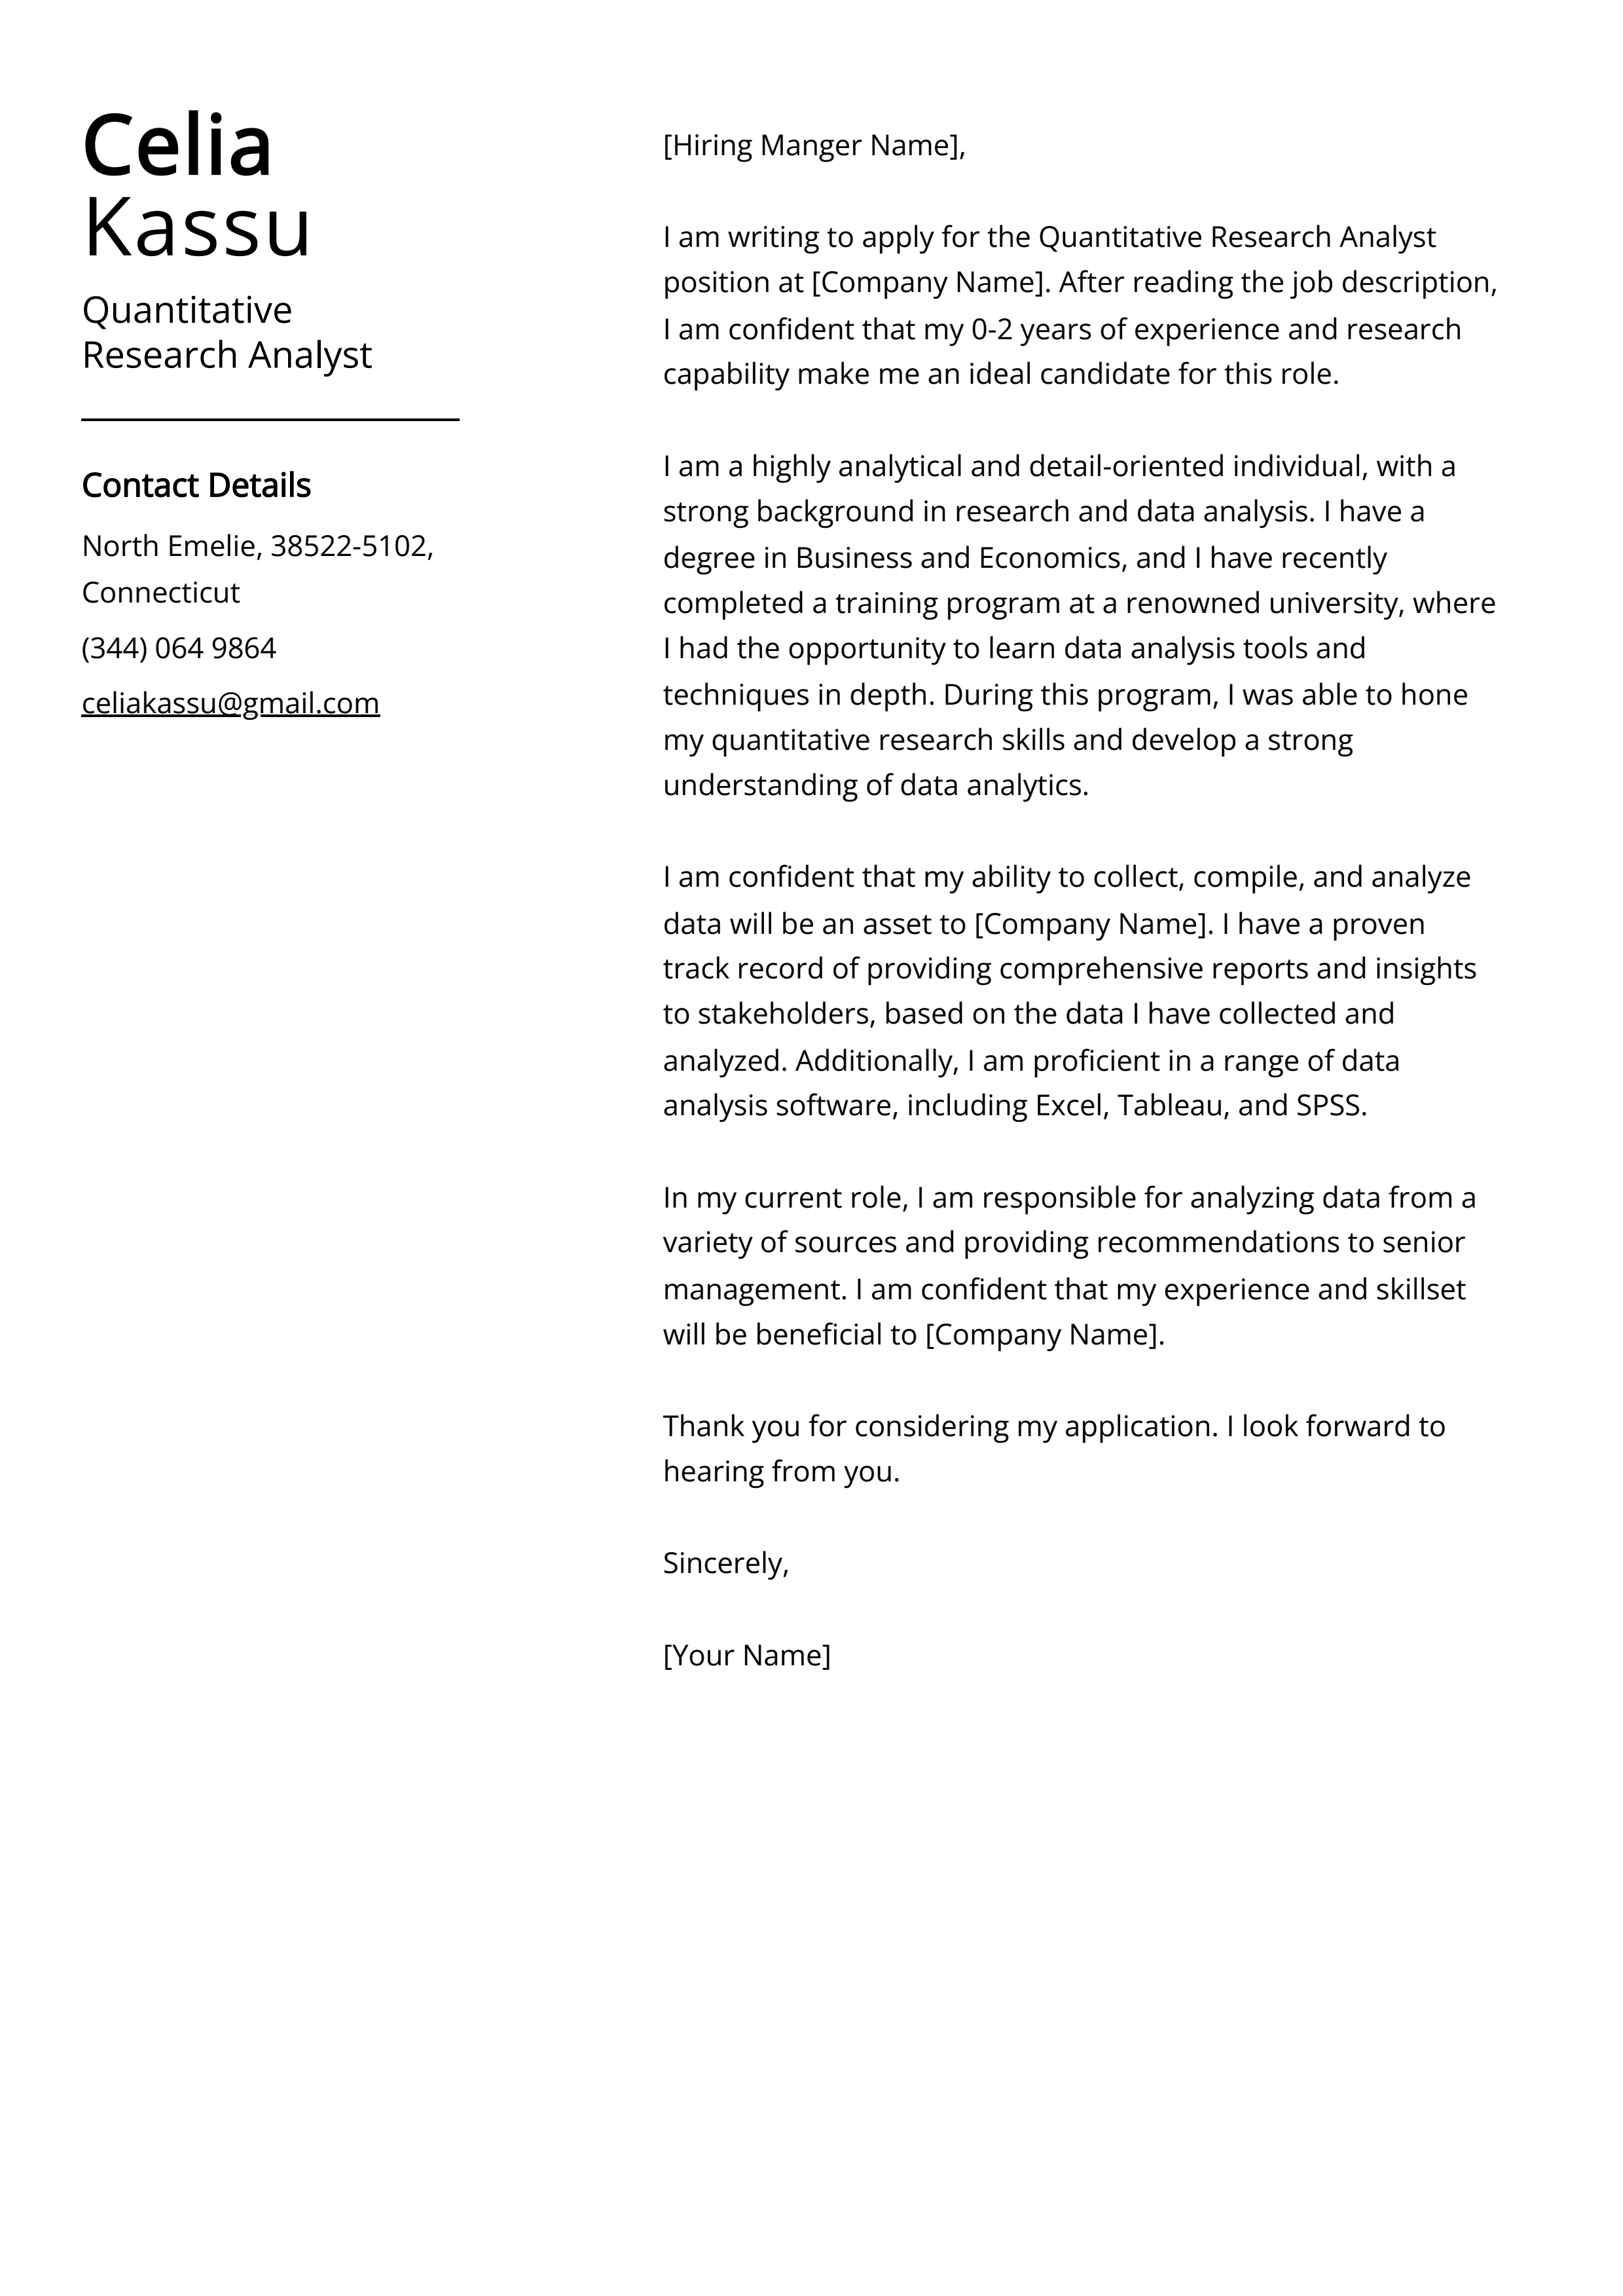 Quantitative Research Analyst Cover Letter Example